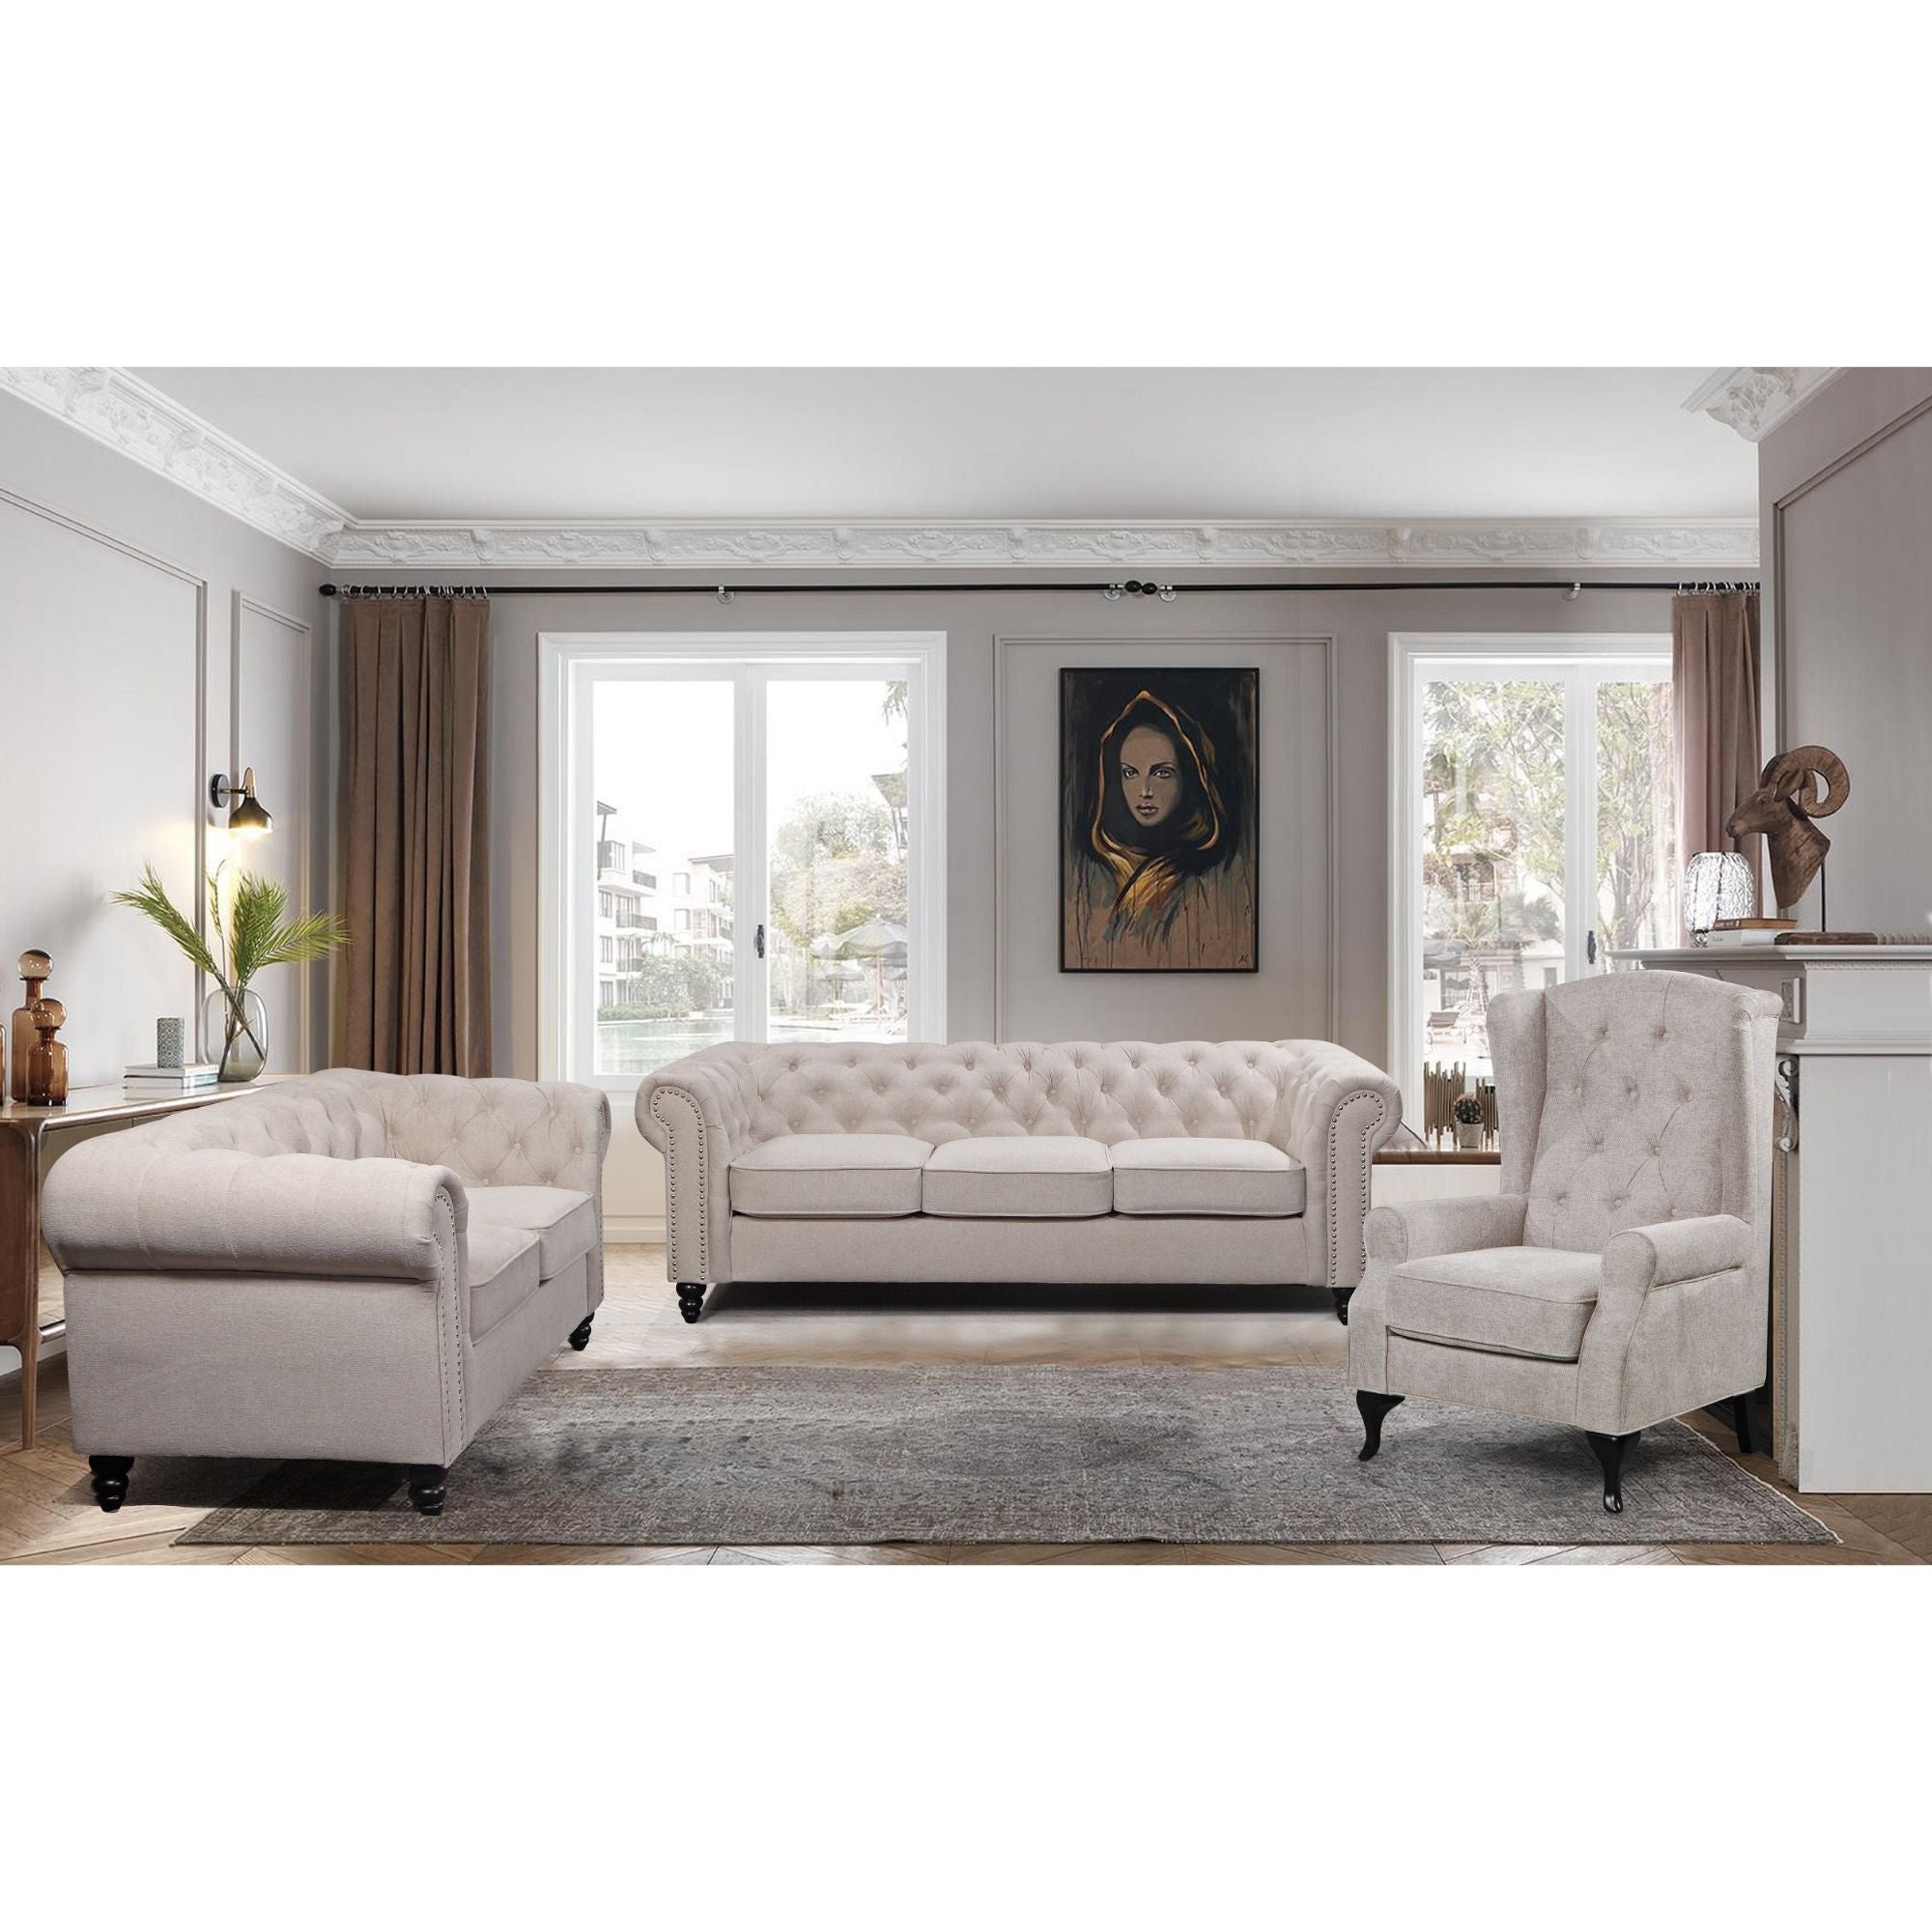 Mellowly 3 Seater Sofa Fabric Uplholstered Chesterfield Lounge Couch - Beige